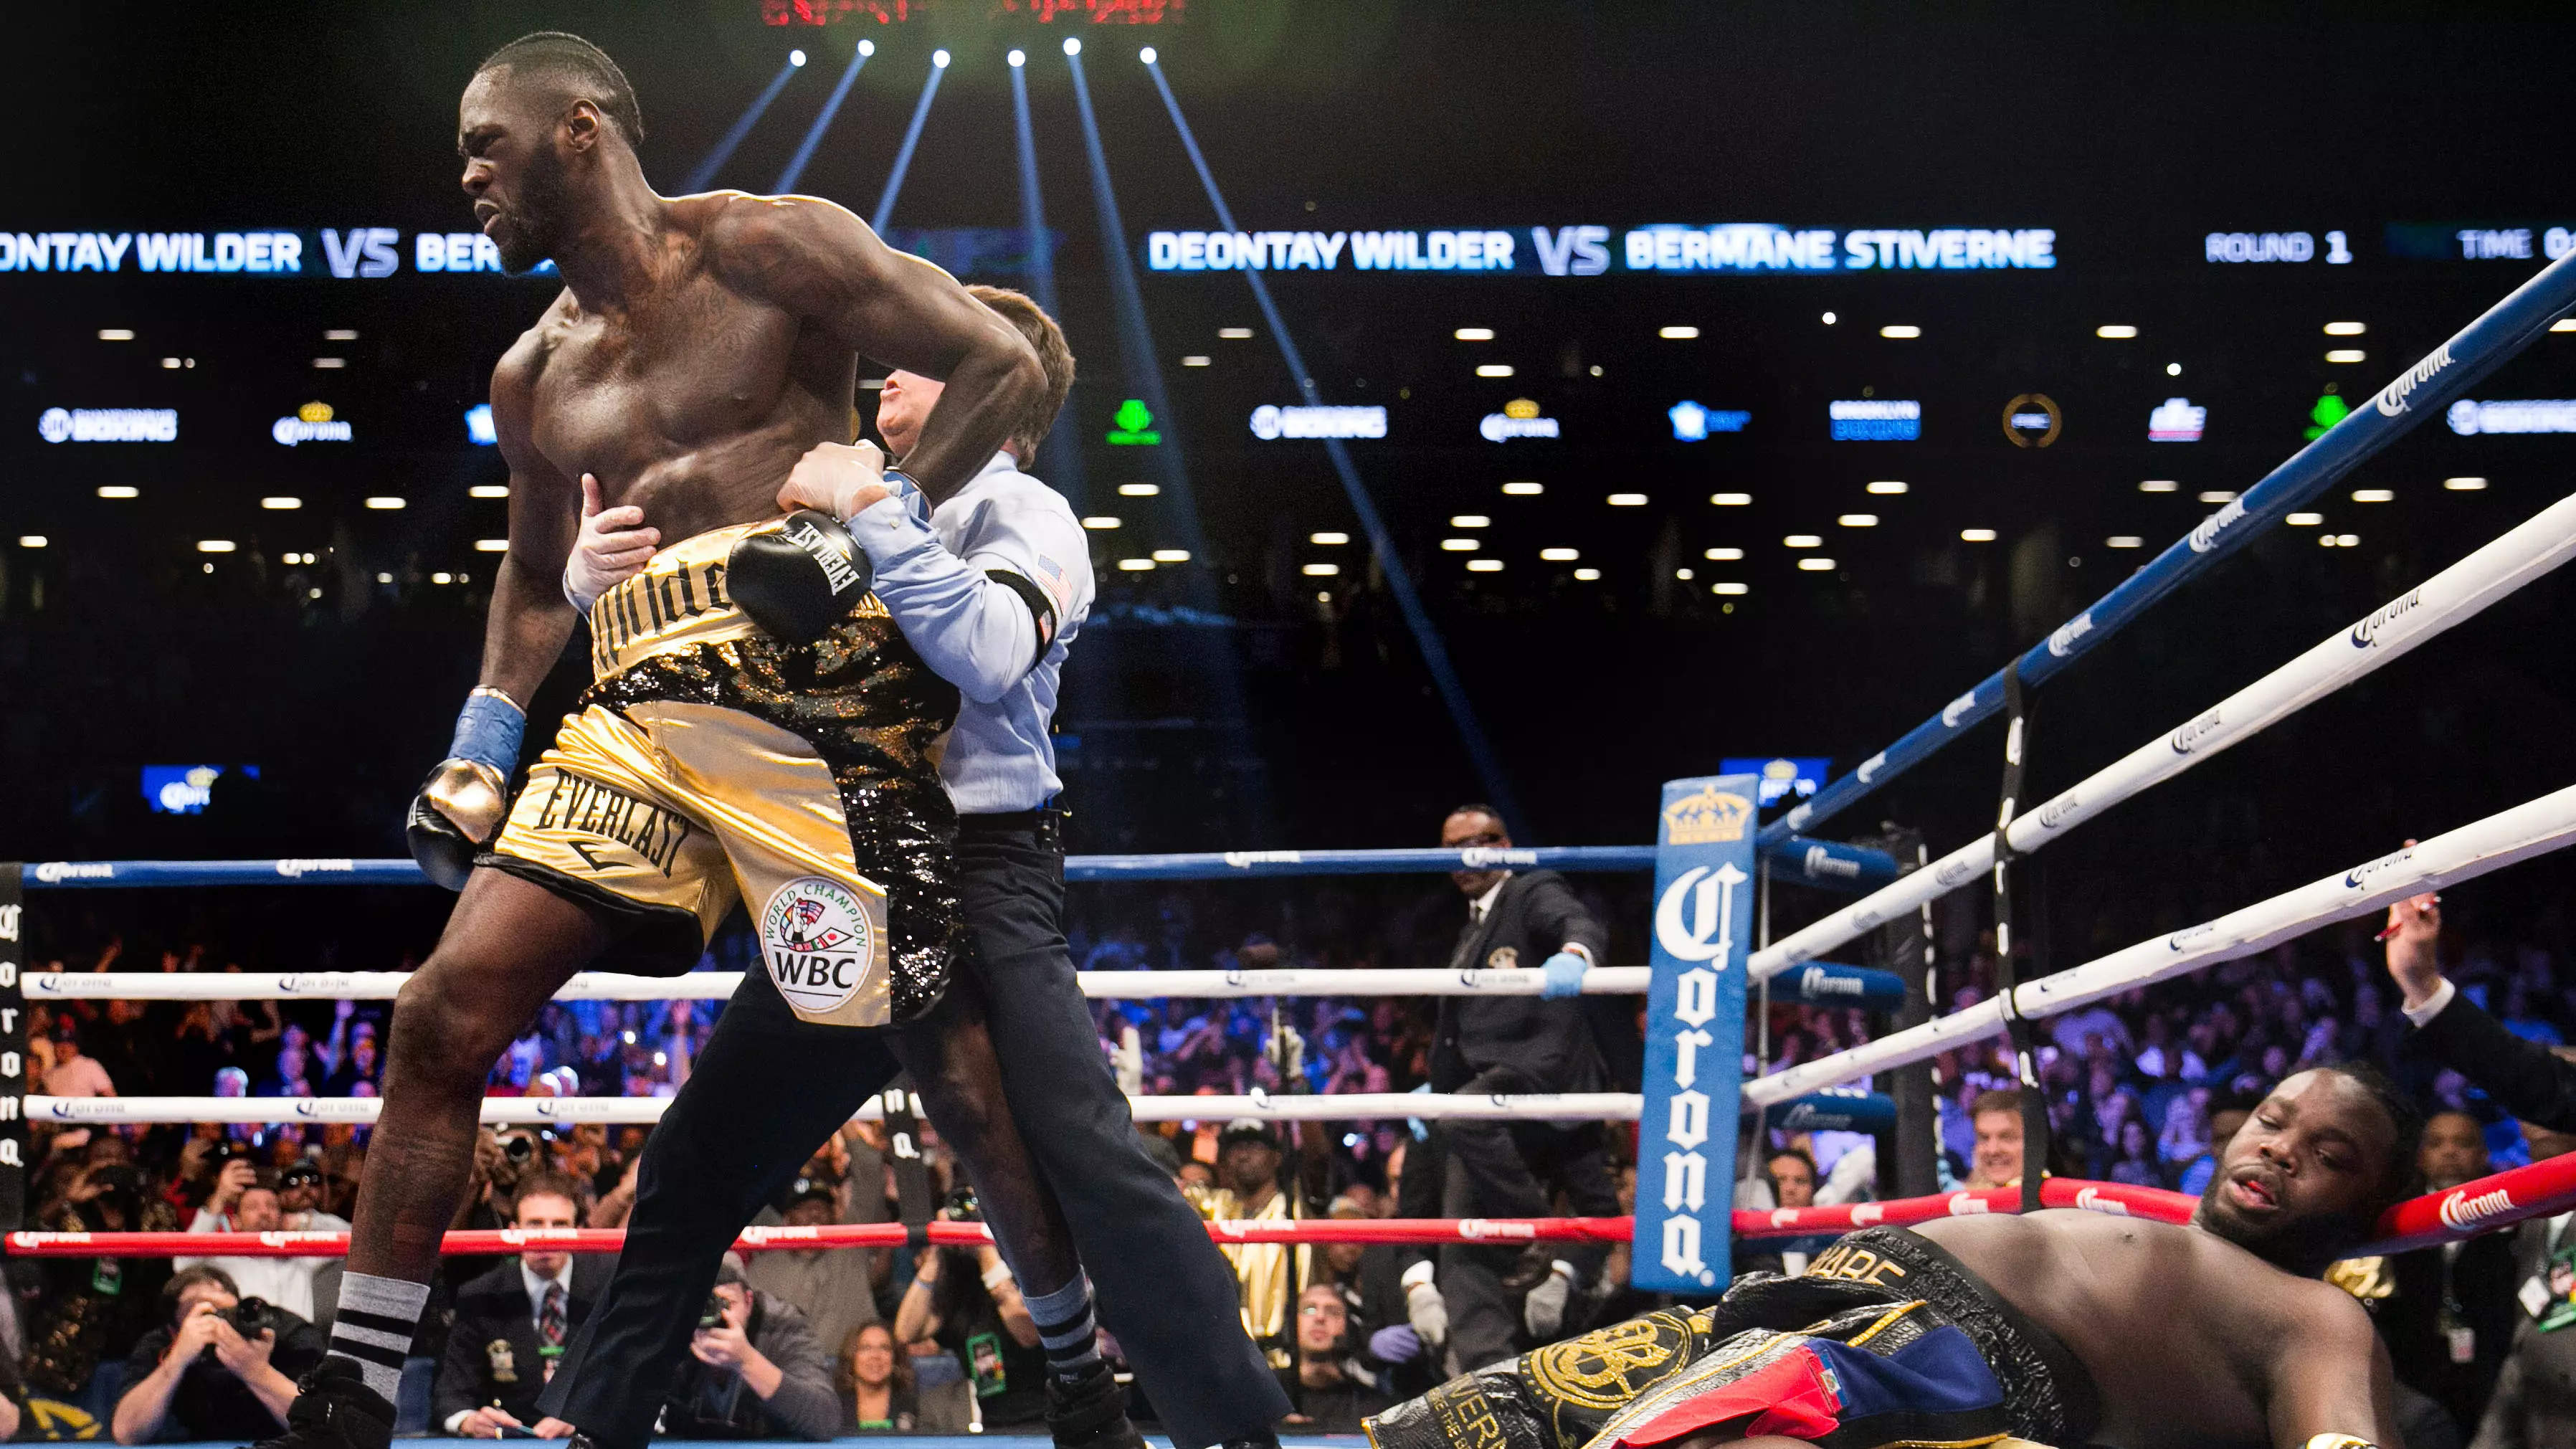 Deontay Wilder Lays Out Bermane Stiverne With First Round Knockout